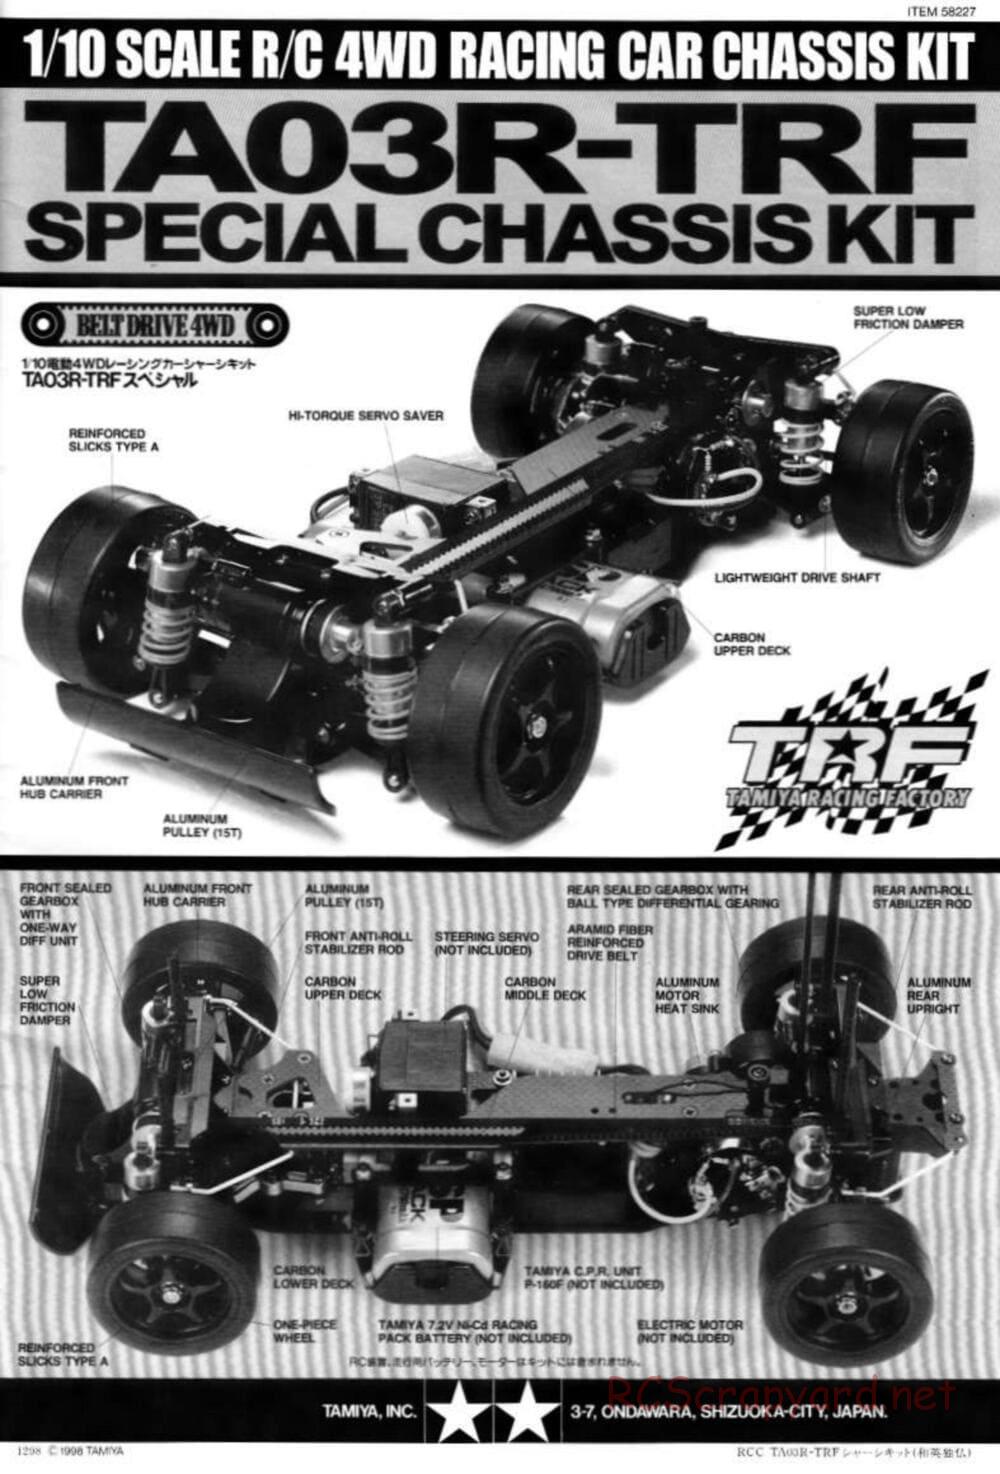 Tamiya - TA-03R TRF Special Edition Chassis - Manual - Page 1